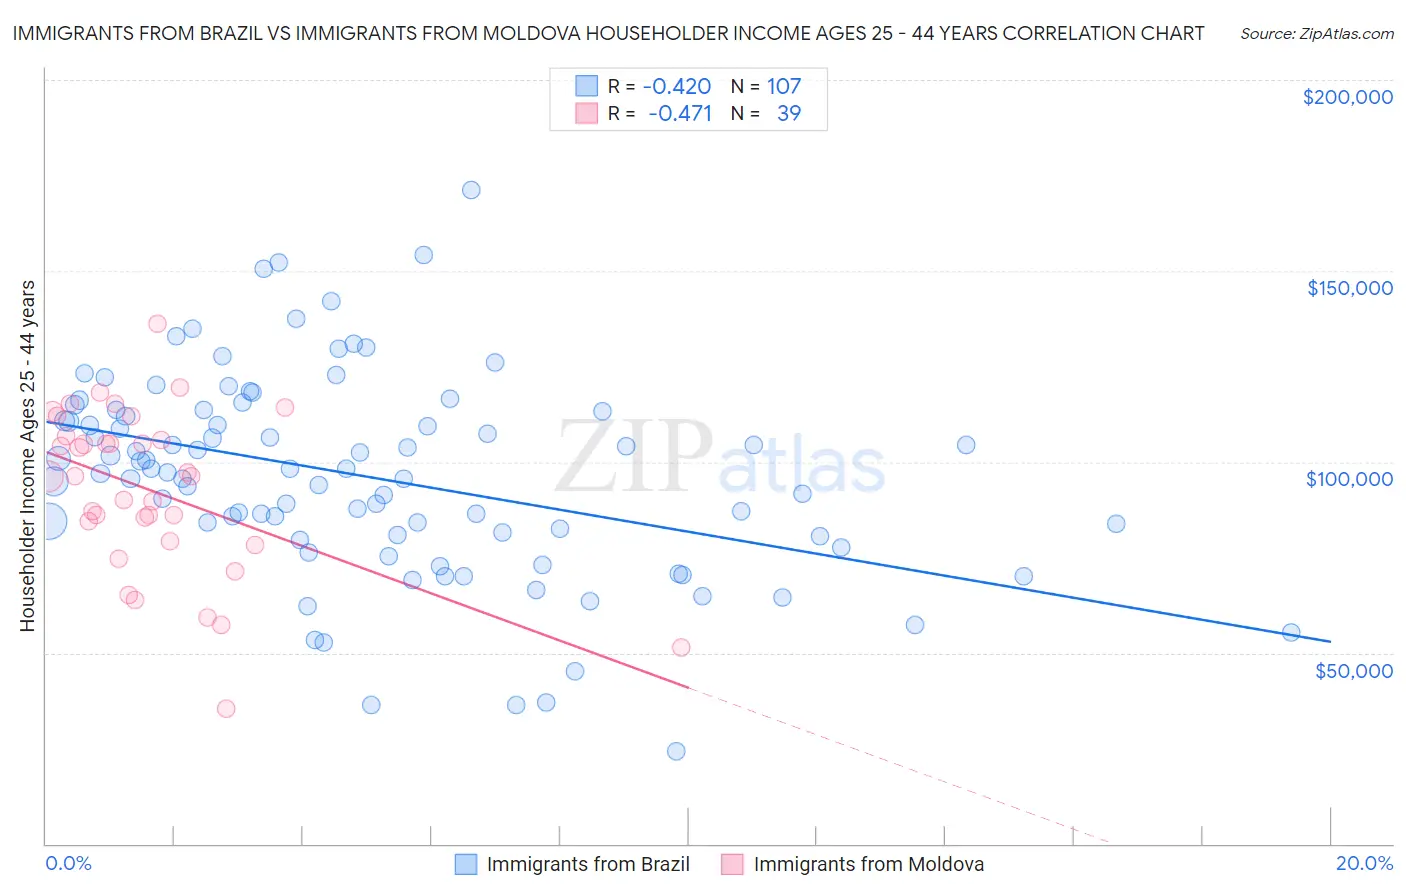 Immigrants from Brazil vs Immigrants from Moldova Householder Income Ages 25 - 44 years